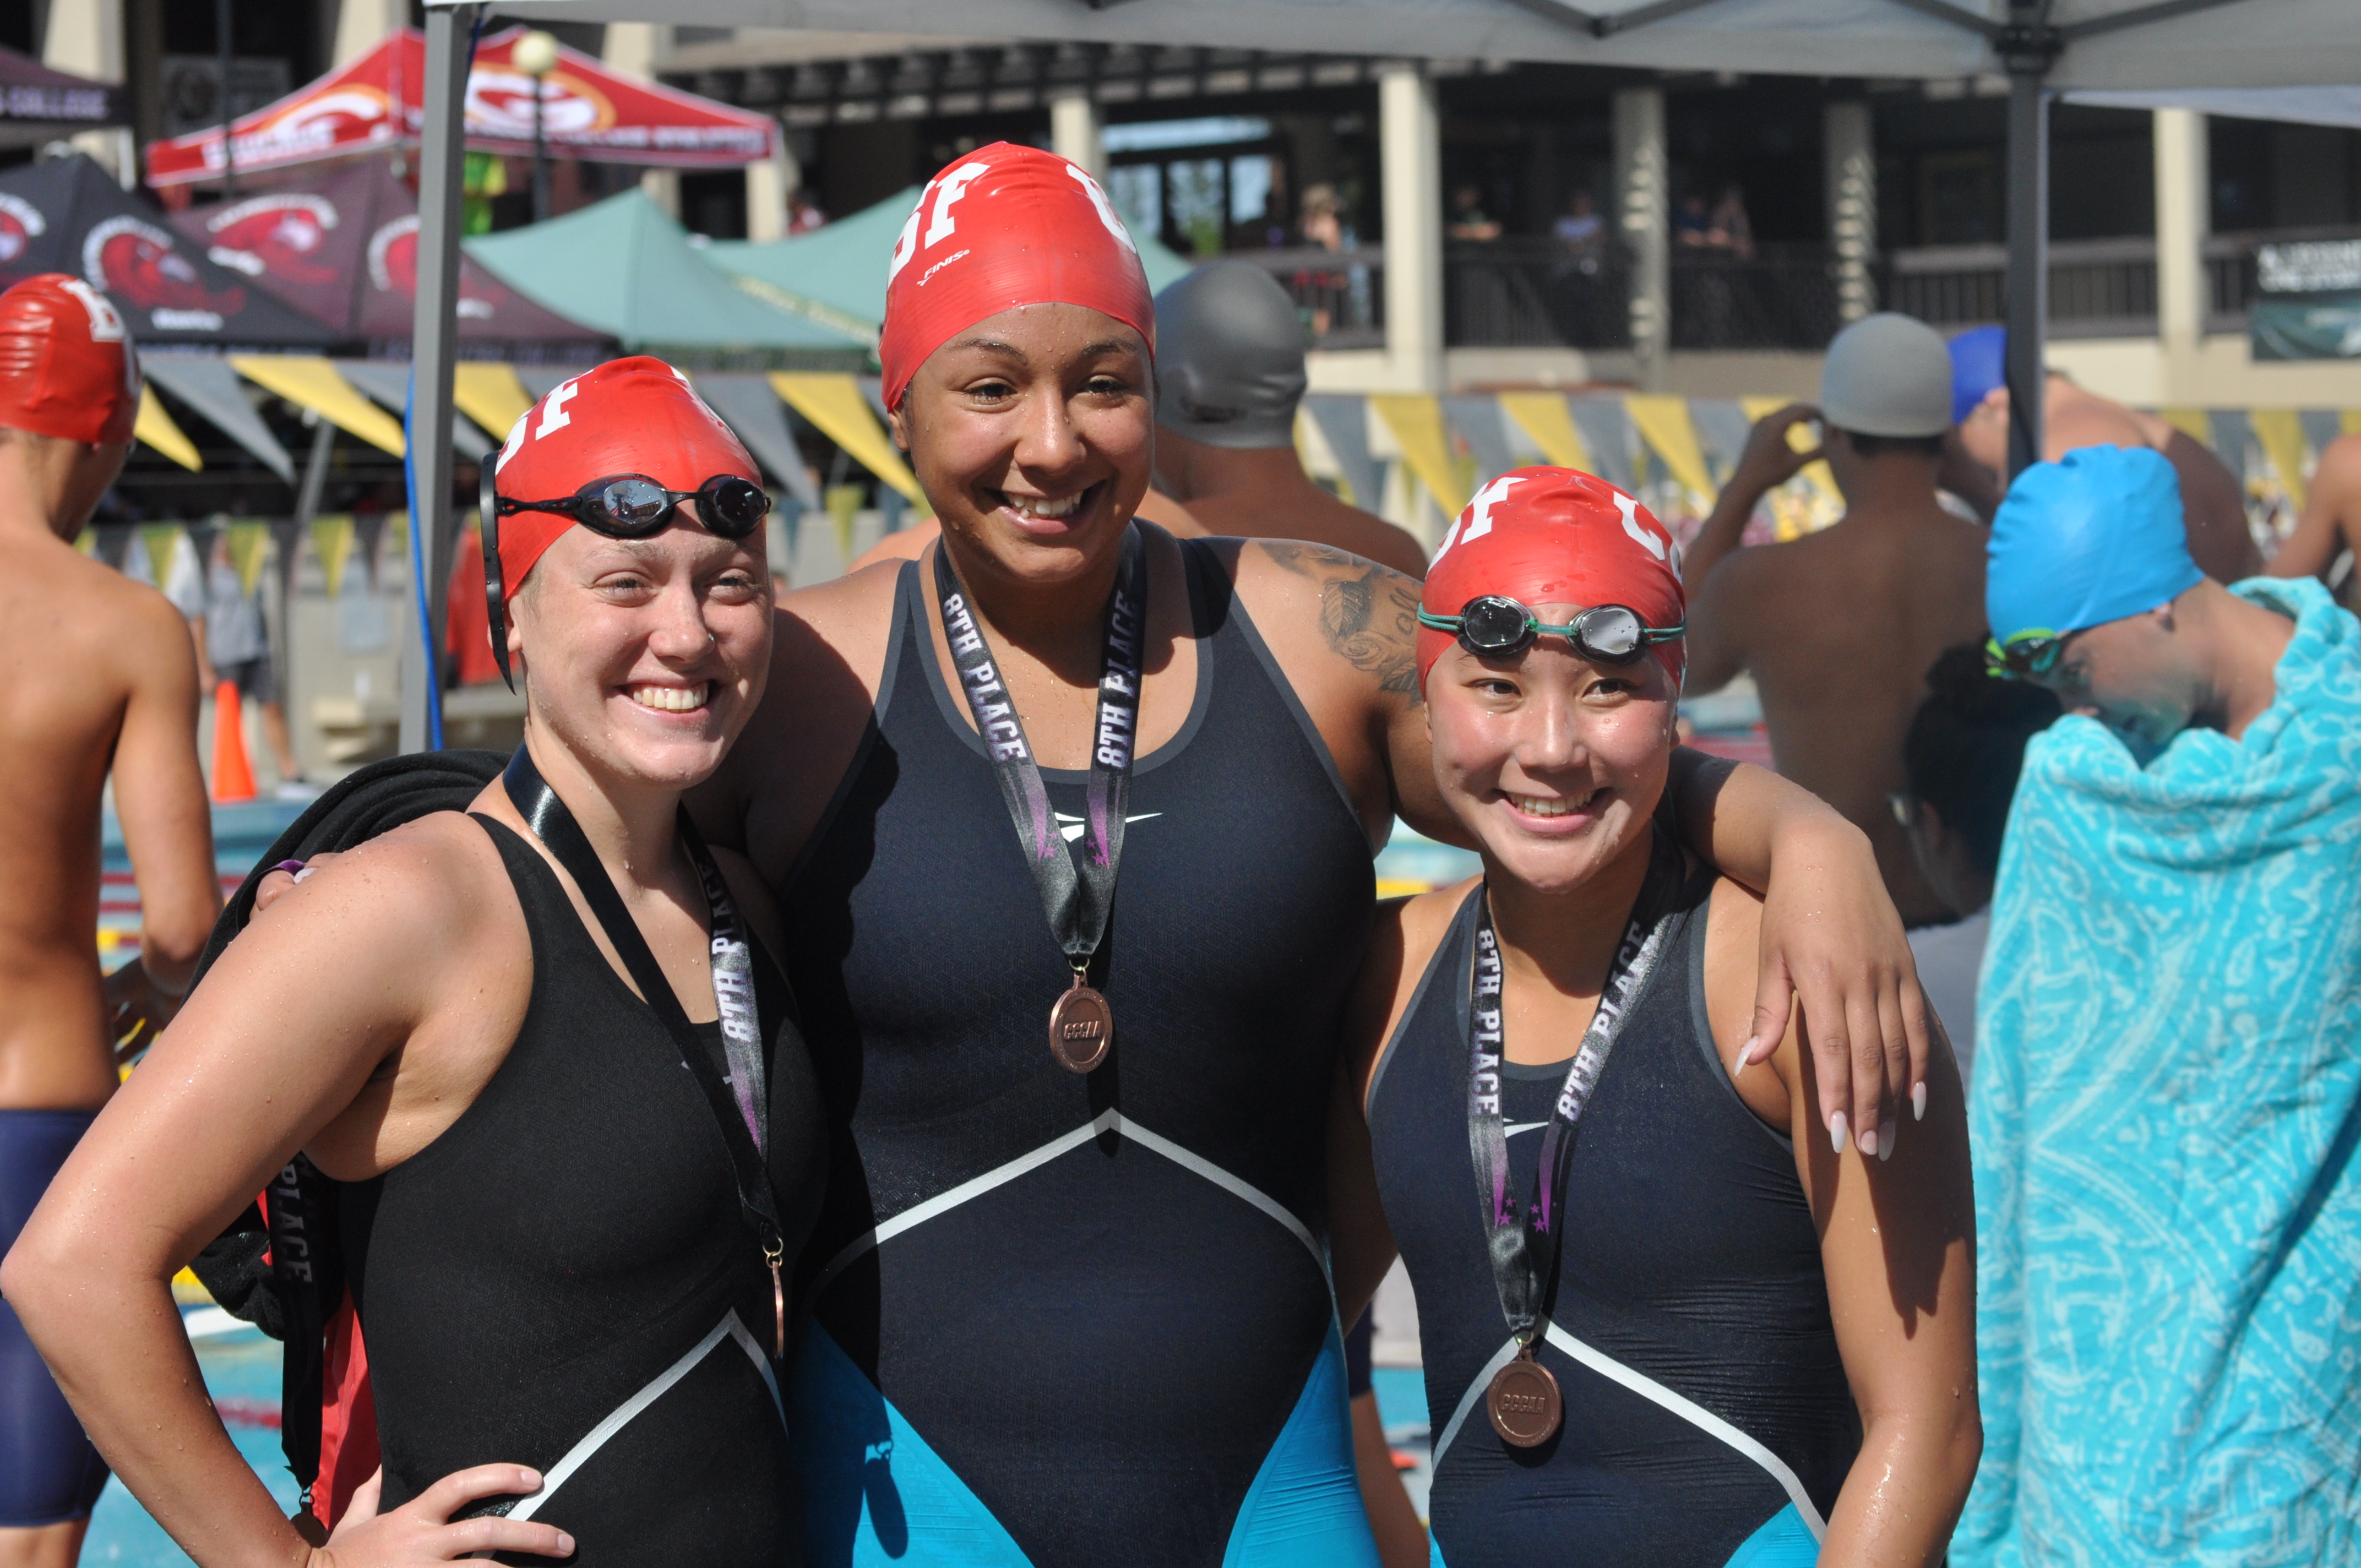 Ashley Davis, left to right, Julia Lane, and Alika Lew-Koga are all in smiles after placing 8th in 200 Yard Medley team relay at De Anza College on May 4, 2018. Photo by Peter J. Suter/The Guardsman.